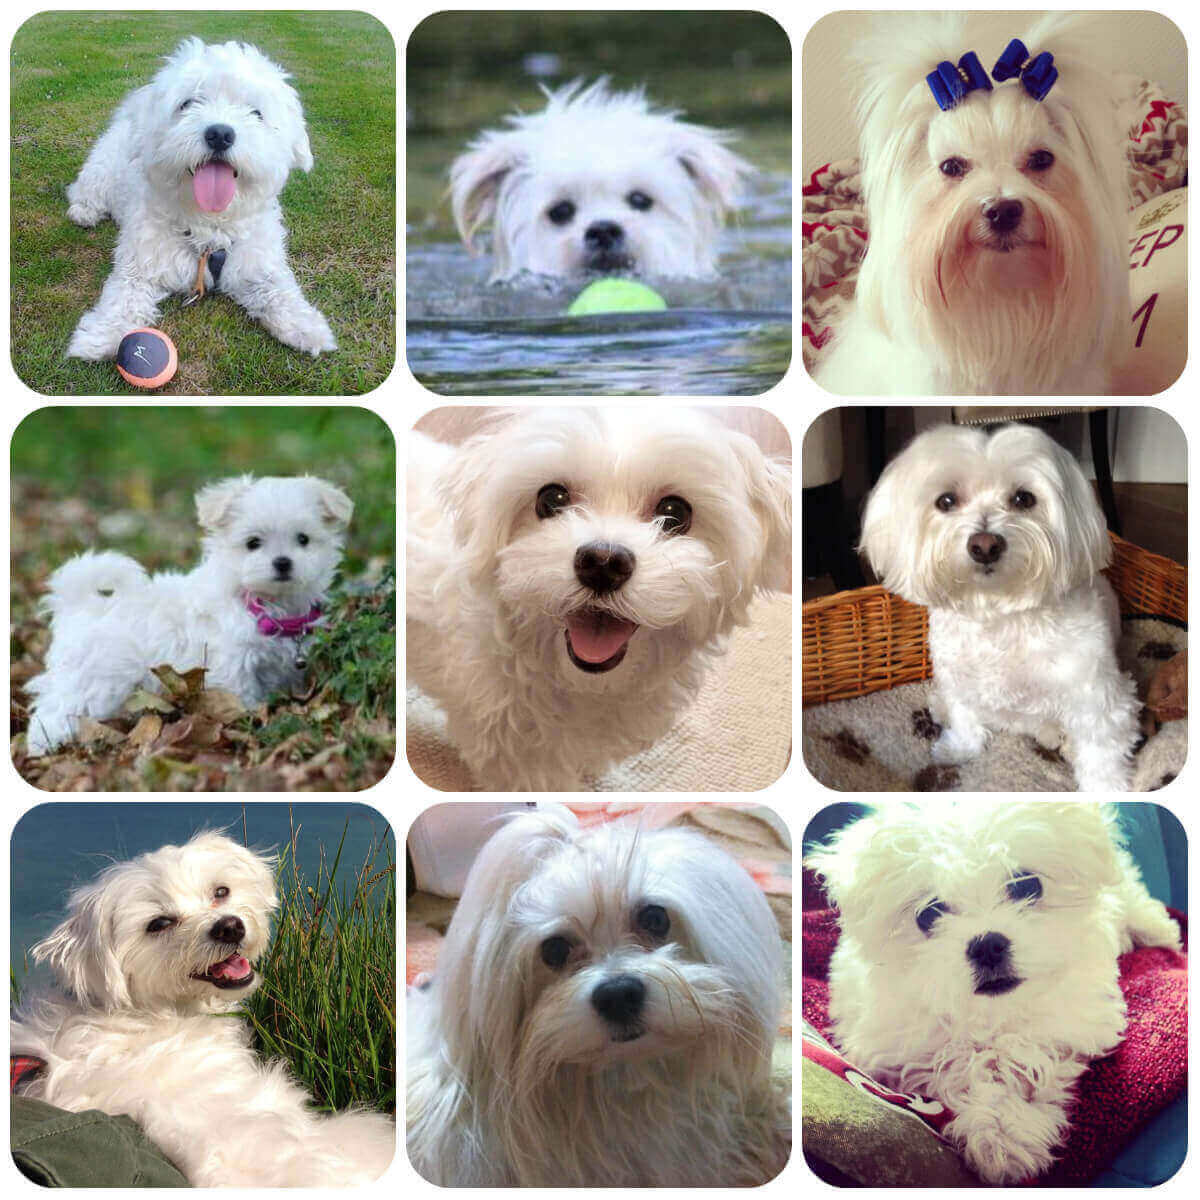 A collage of images of Maltese dogs. They are all small, white dogs with long hair although their hair has been styled in a variety of ways.